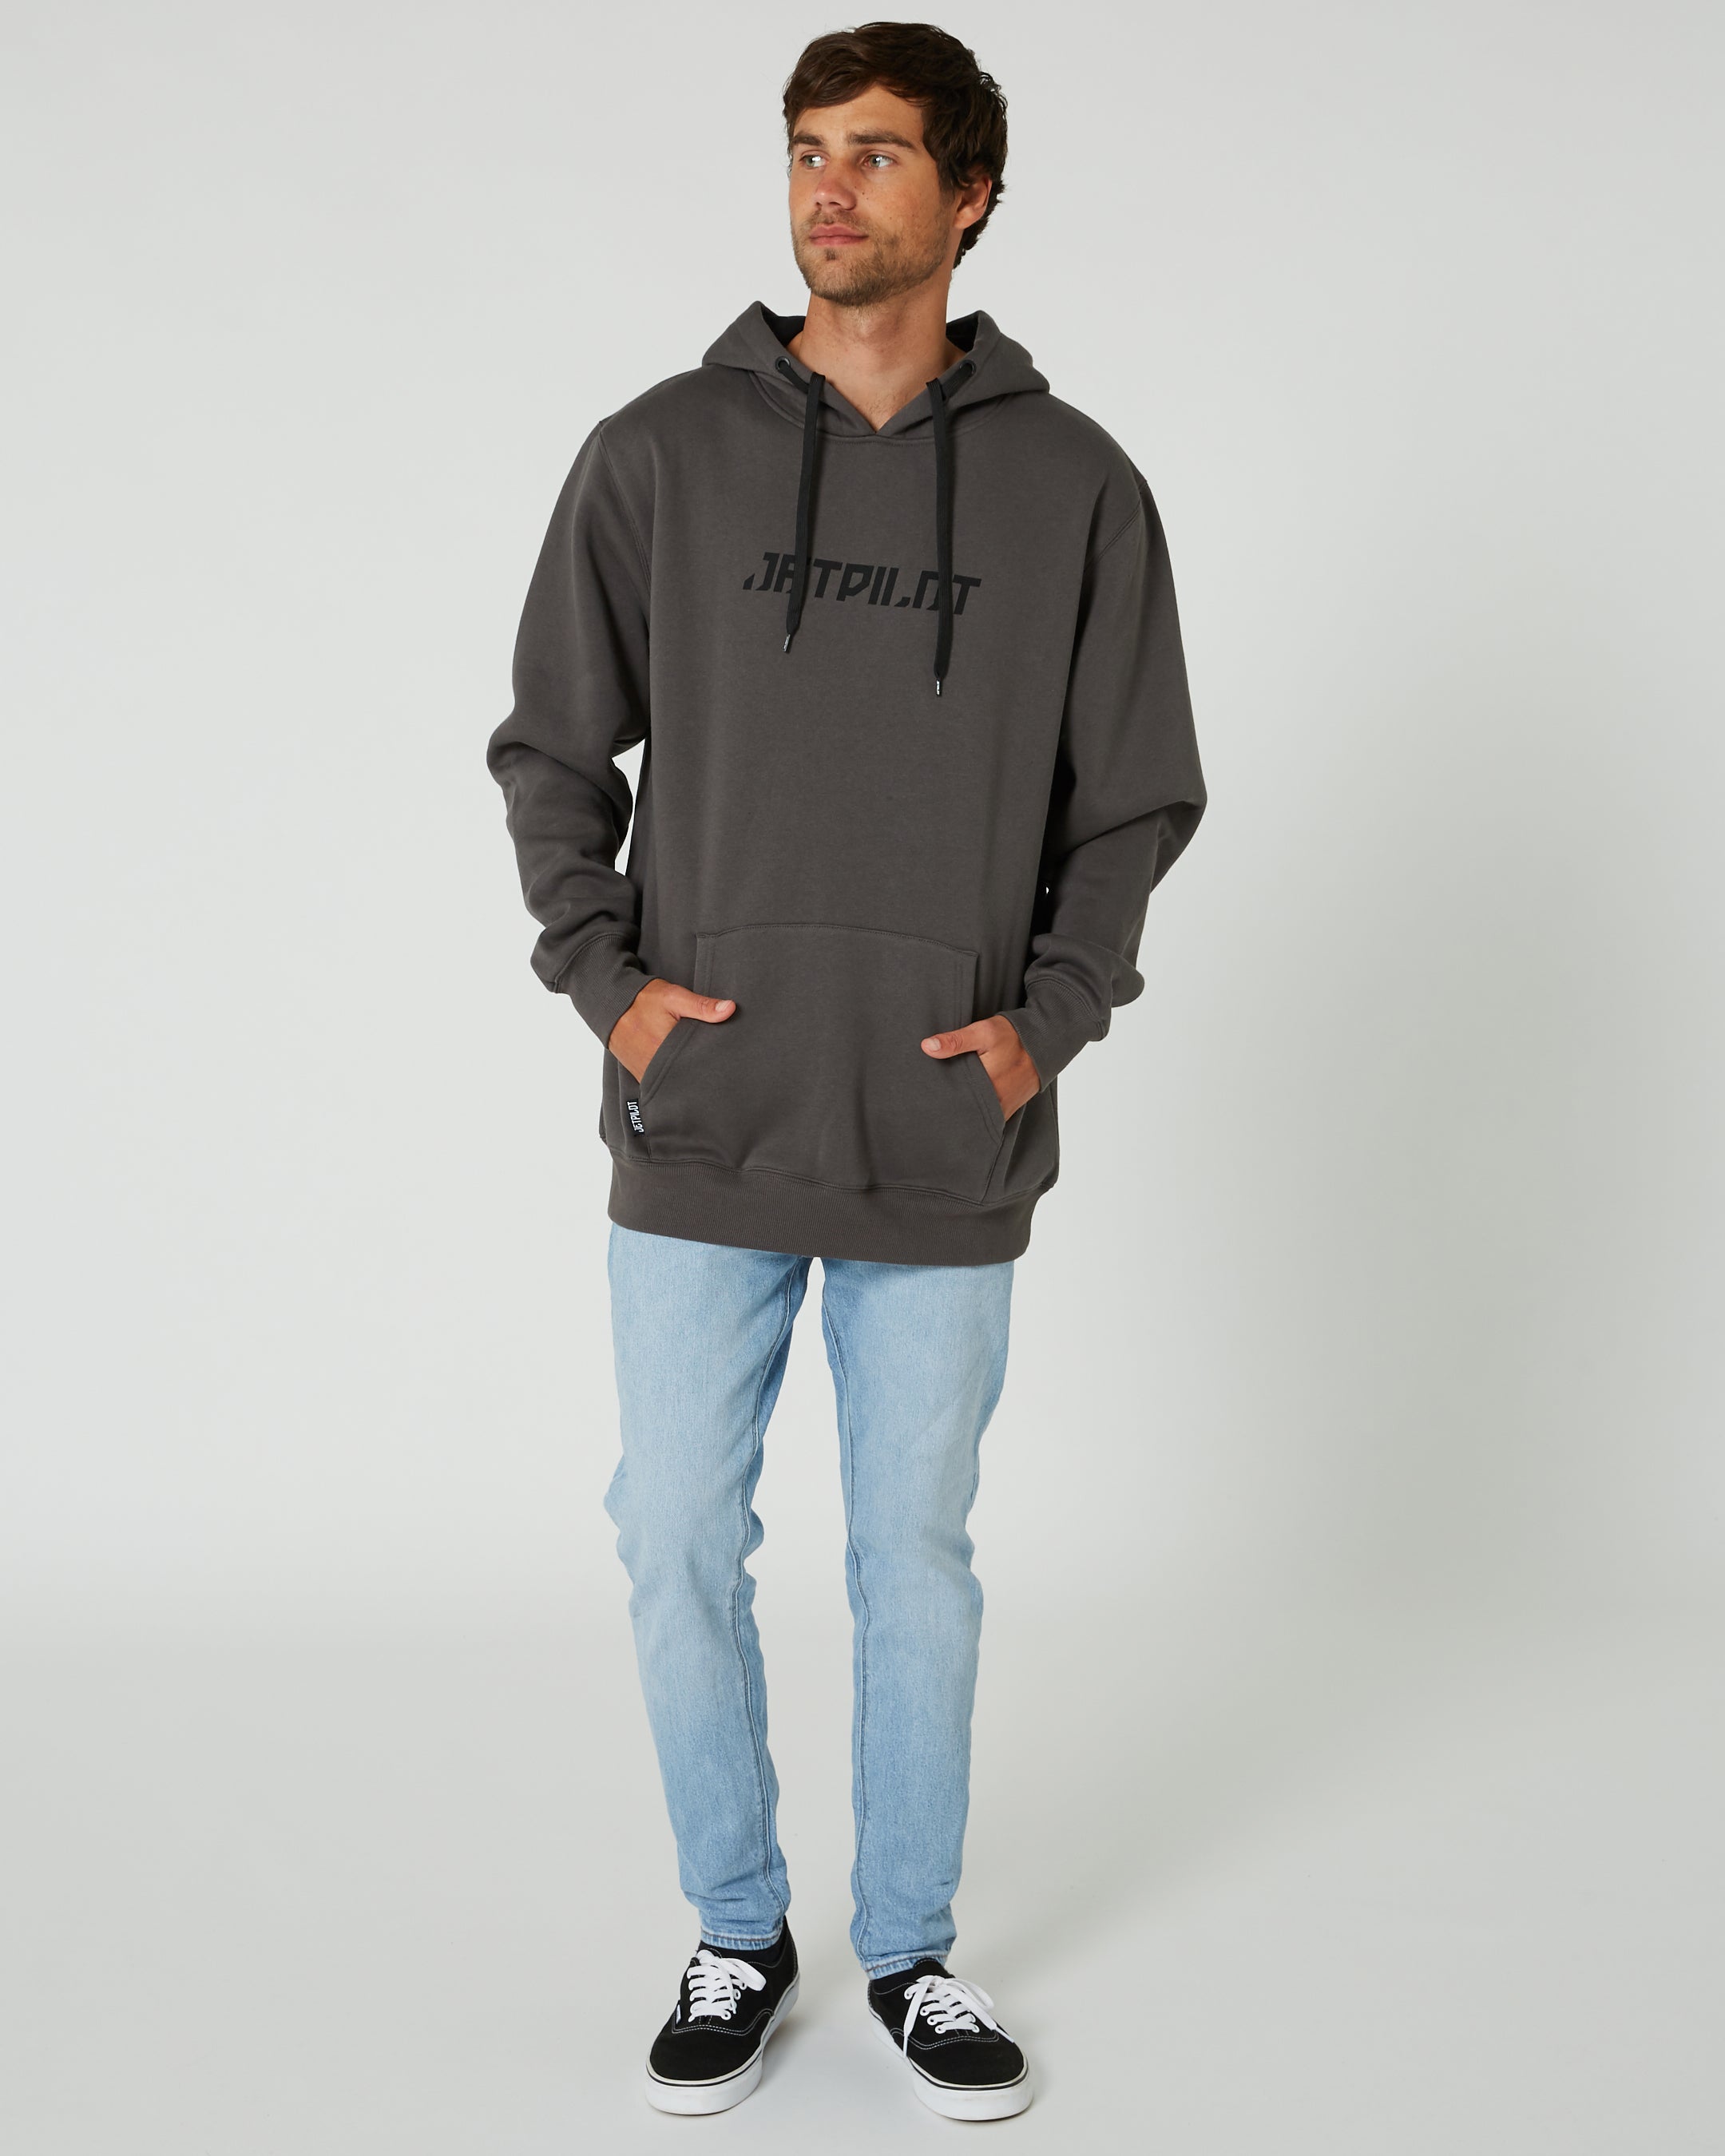 Jetpilot Cause Mens Pullover Hoodie - Charcoal 3